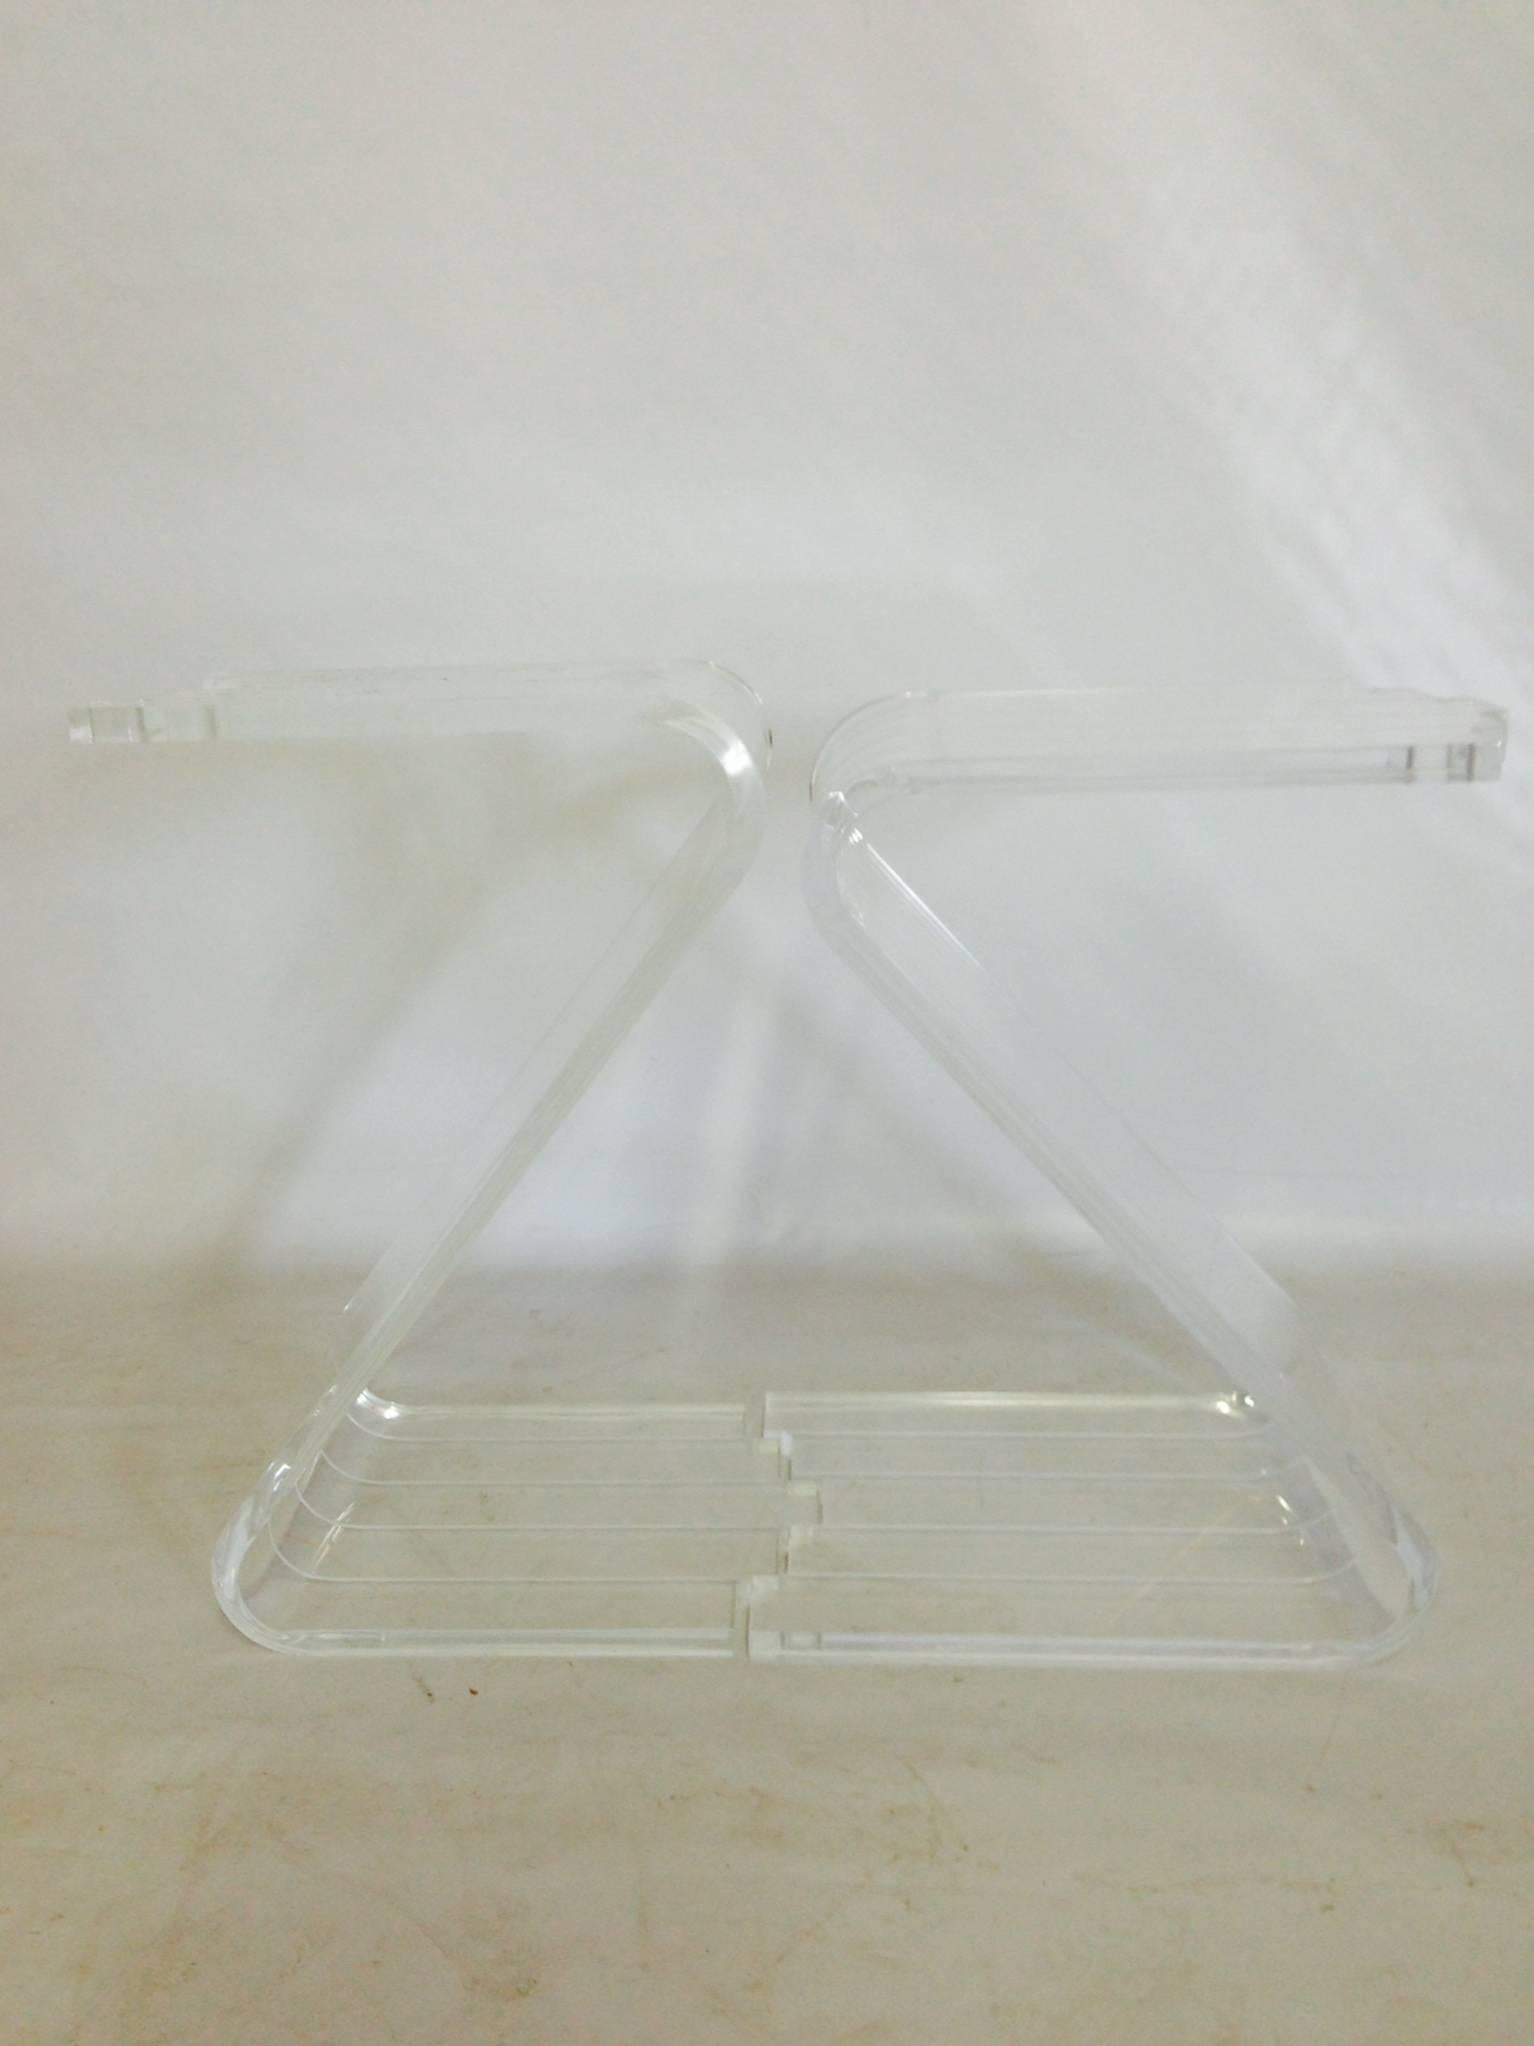 Rare pair of Lucite grooved "Z" form puzzle piece side or end table pair, 1970s. Zigzag bottom detail that allows connection at the base. These tables intentionally vary in height slightly. The smaller one is 20.5" inches in